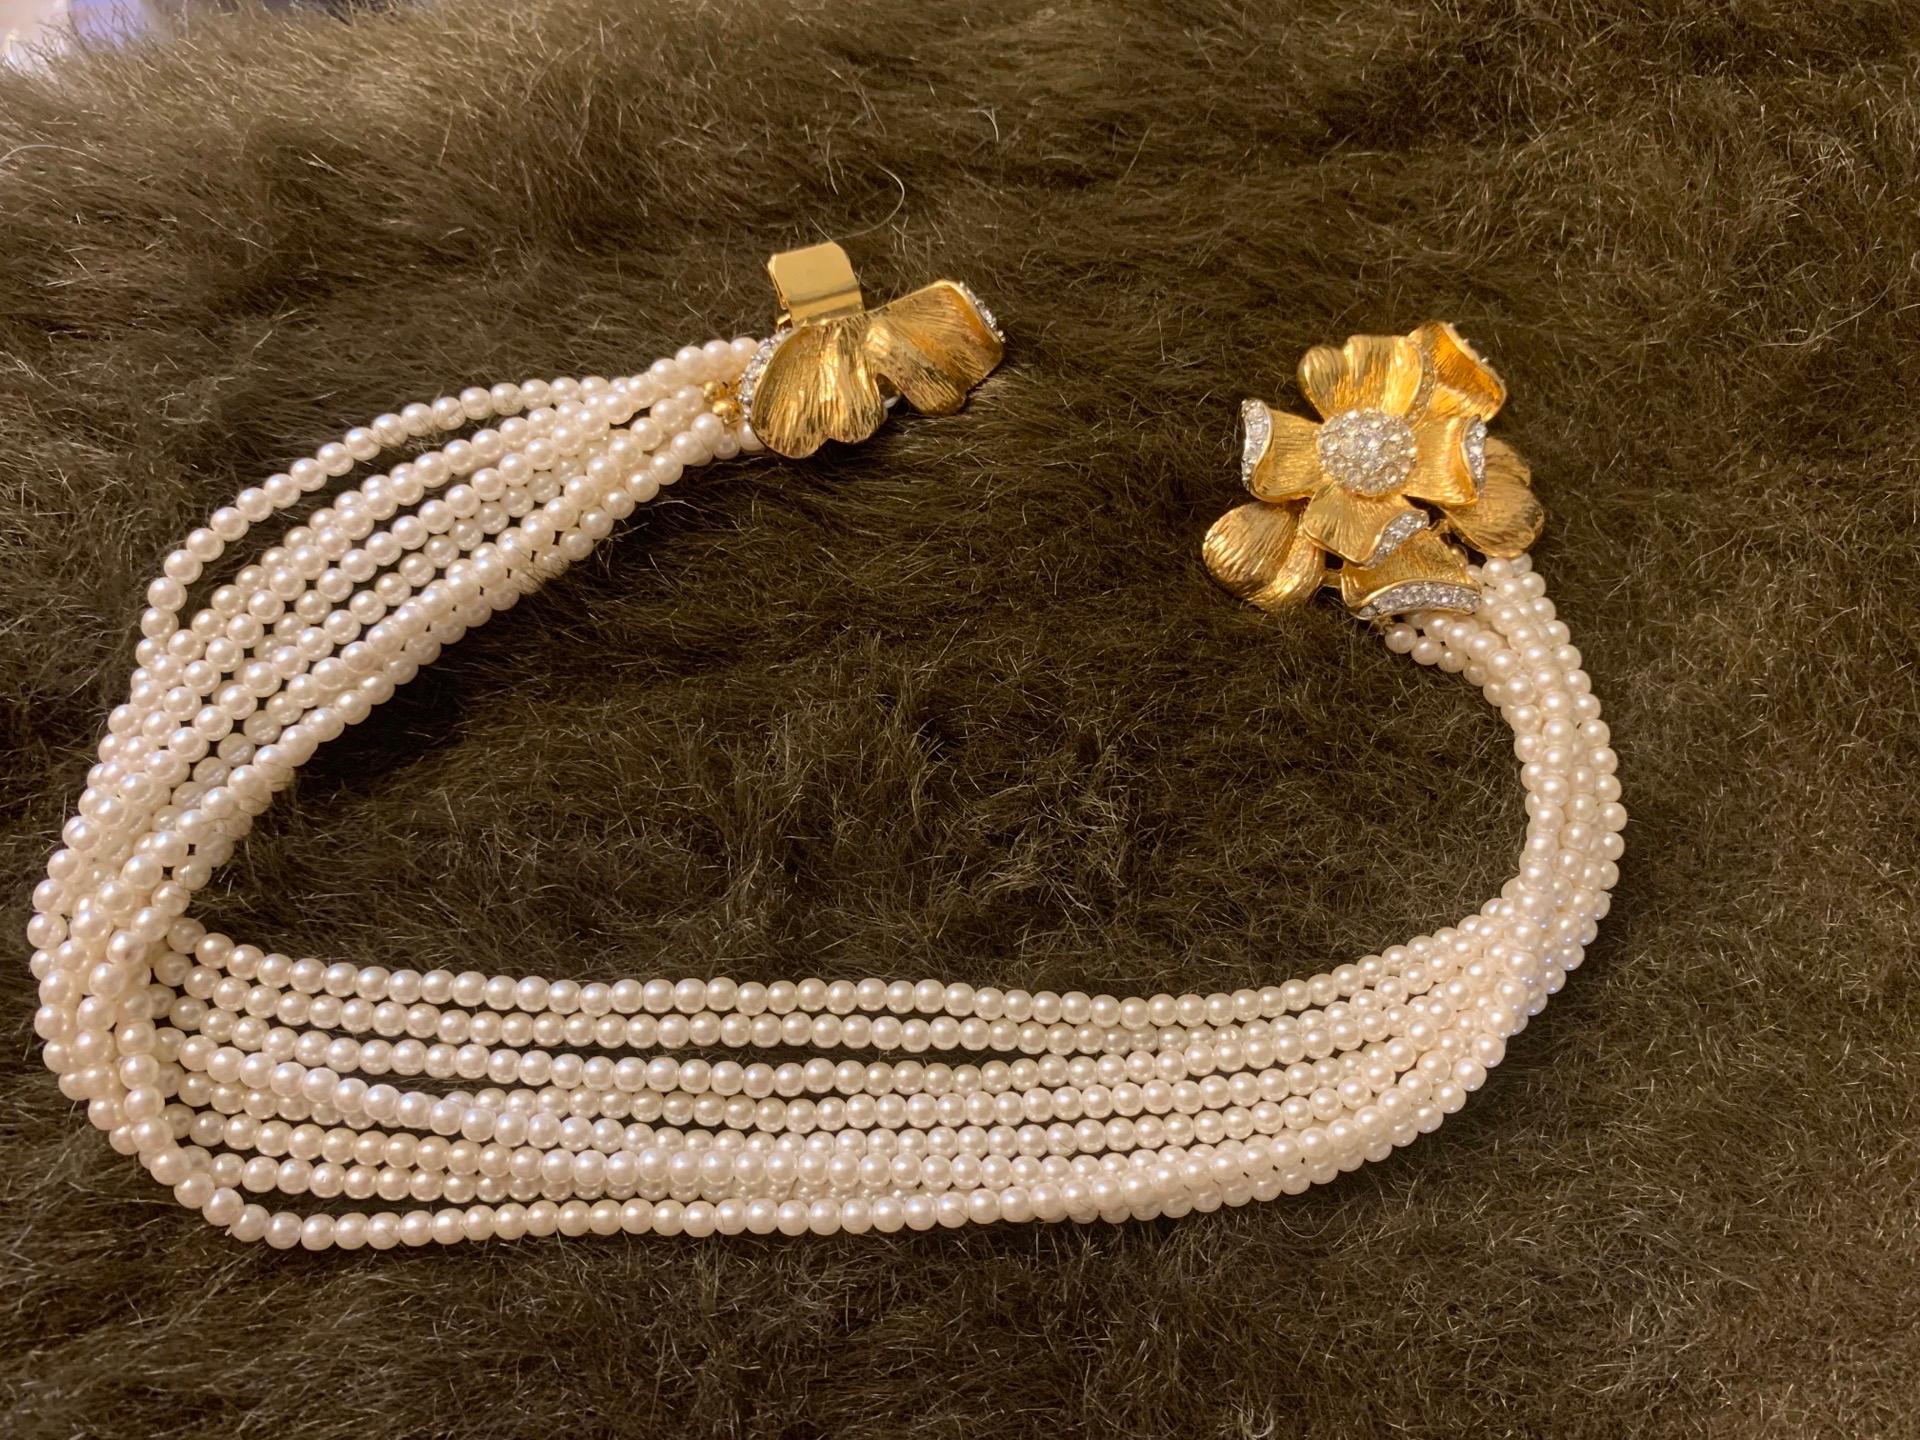 Women's Nolan Miller Srands of Faux Pearls w/ Gold Plated and Rhinestone Flower NWB